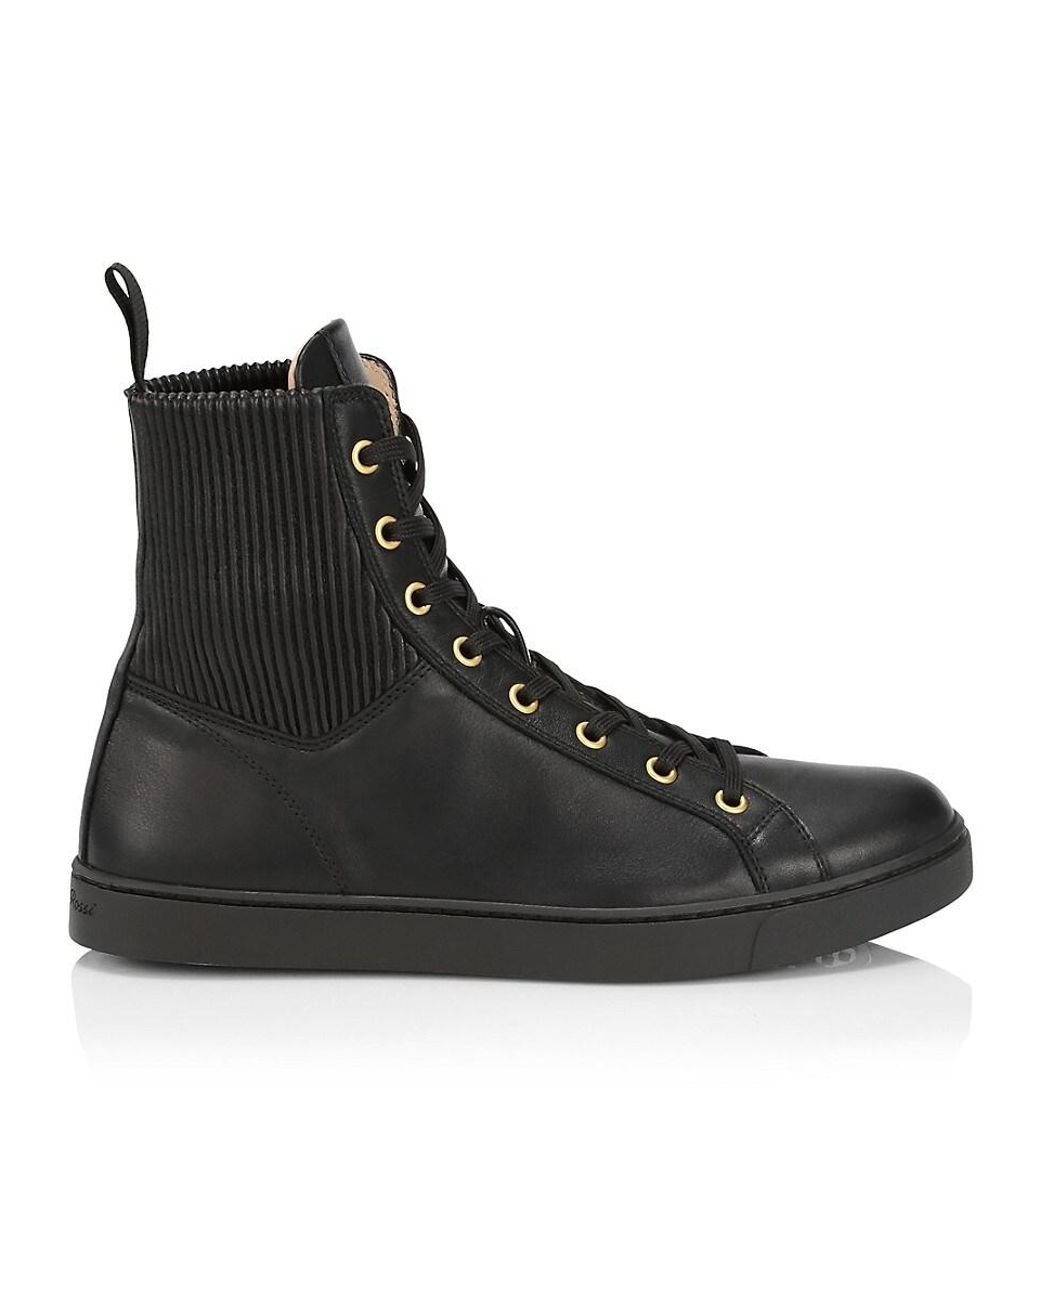 Gianvito Rossi Rib-knit Leather High-top Sneakers in Black | Lyst